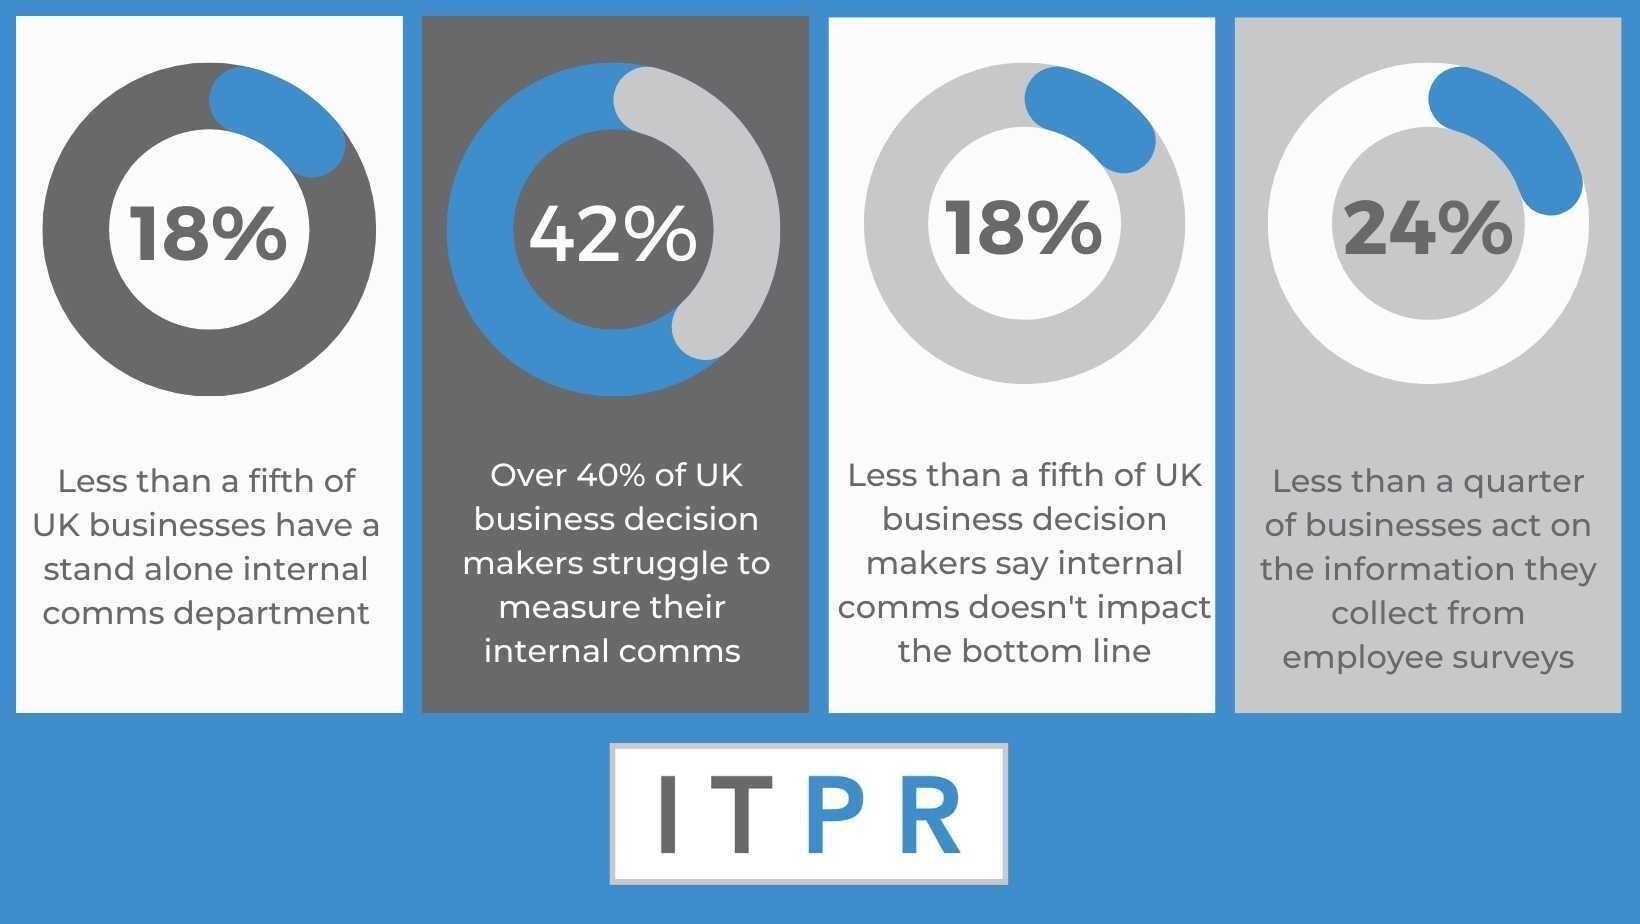 An infographic depicting the stats derived from a UK-focused study on getting the Internal Communications message across